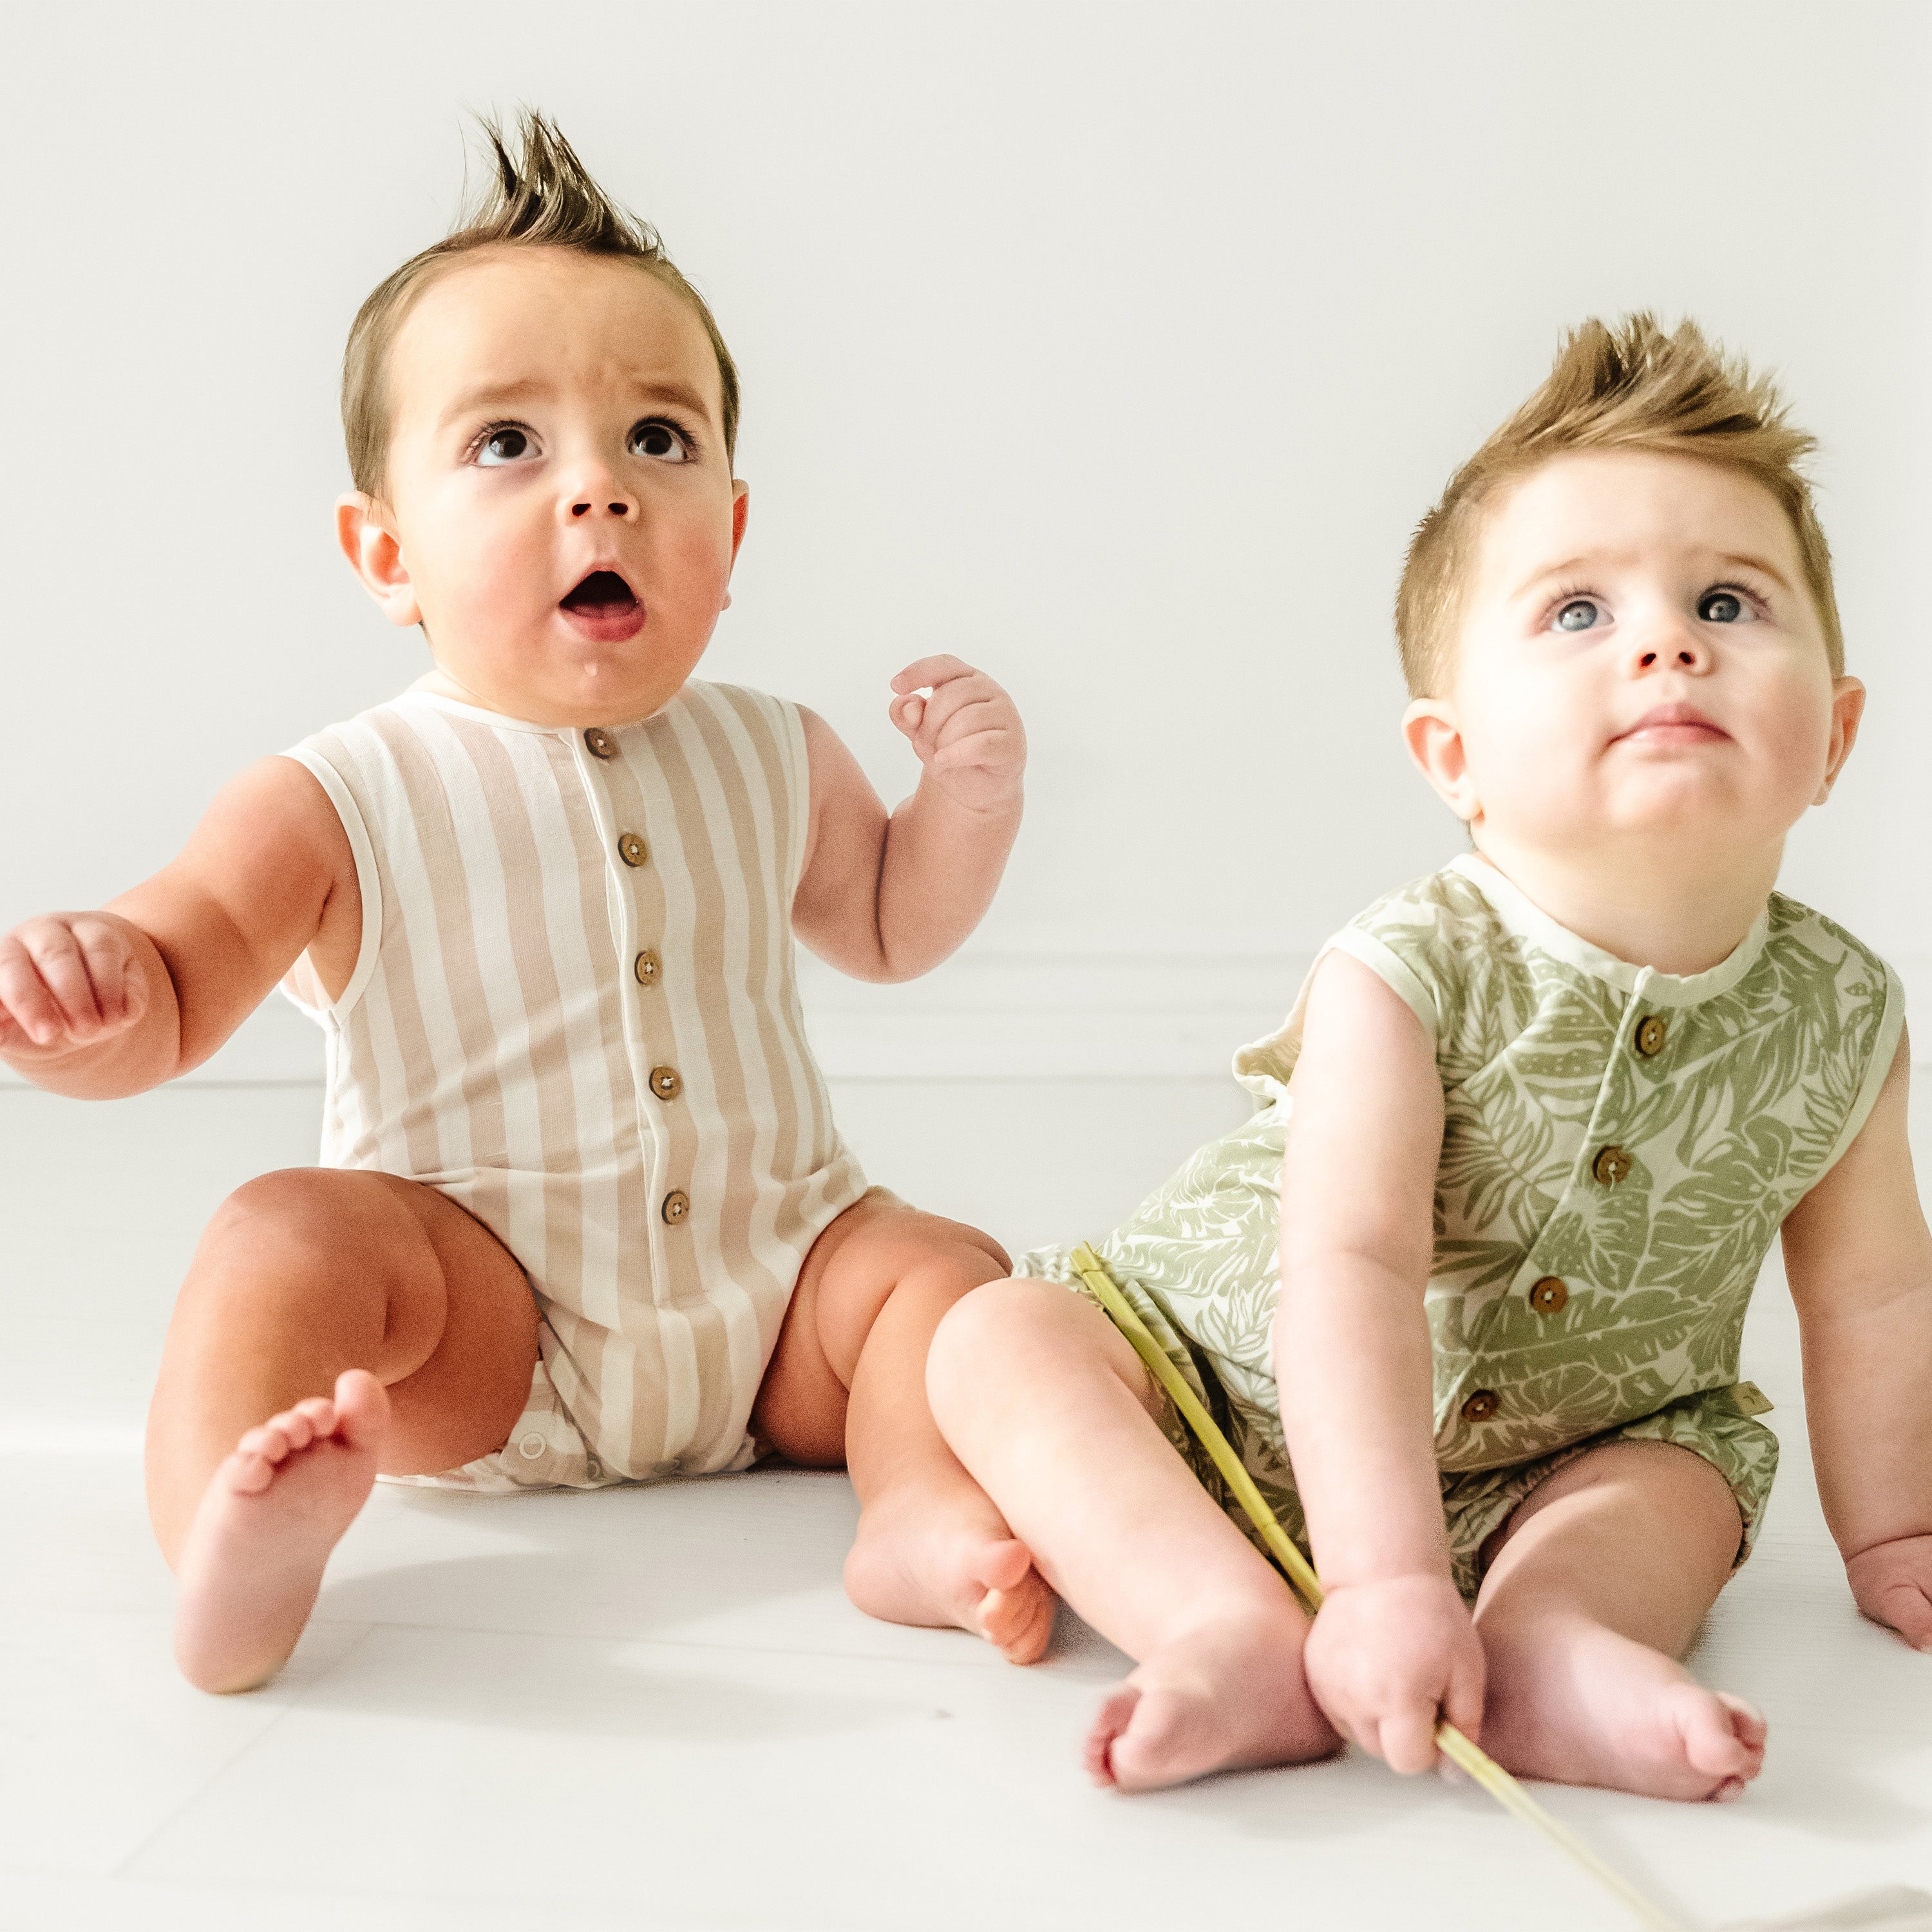 Two adorable baby girls with spiked hair sitting on a white floor, wearing stylish Makemake Organics Organic Sleeveless Bubble Romper in Beige Stripes. One looks surprised and the other holds a thin stick, both gazing towards something off-camera.